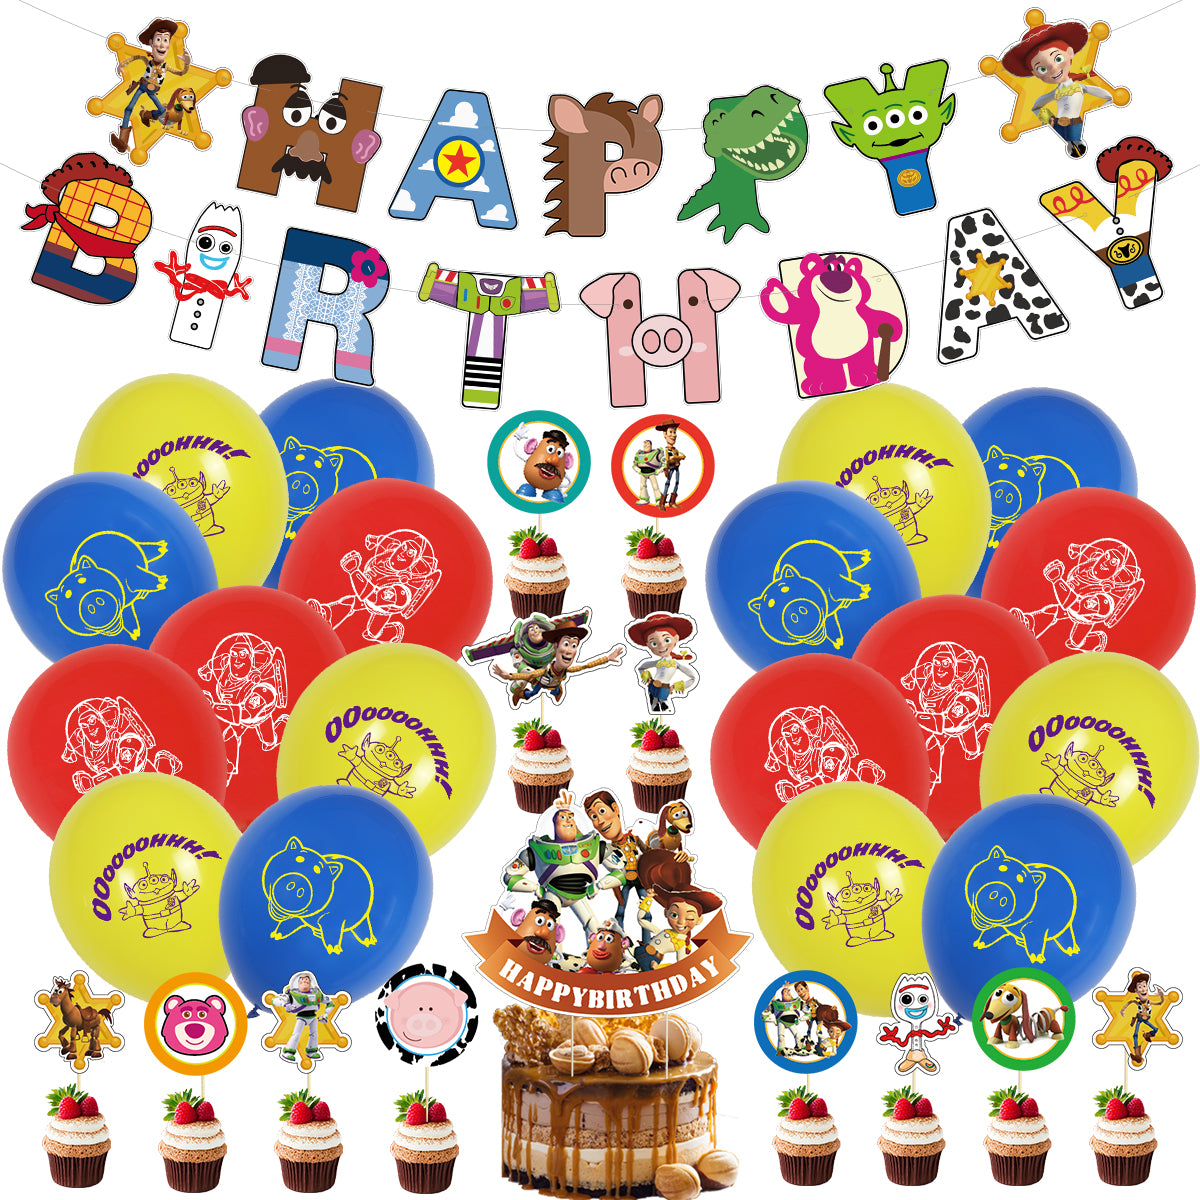 Toy Story Birthday Party Pack Decorations - lylastore